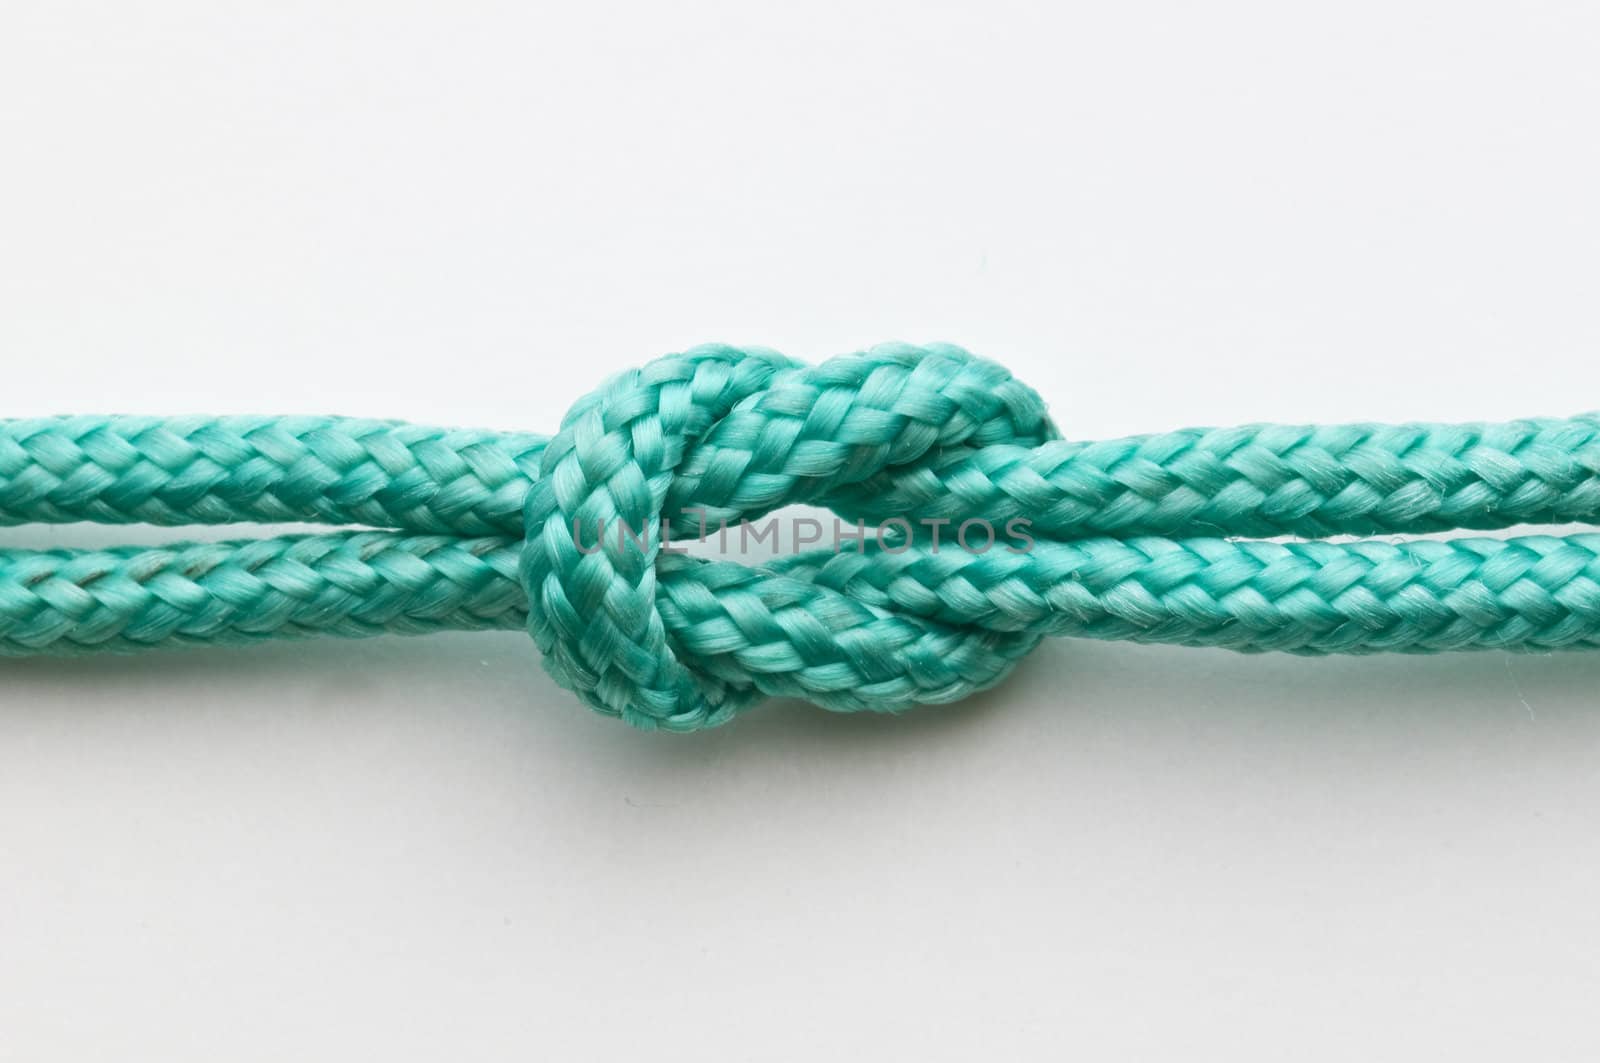 A duoble simple knot on a green rope